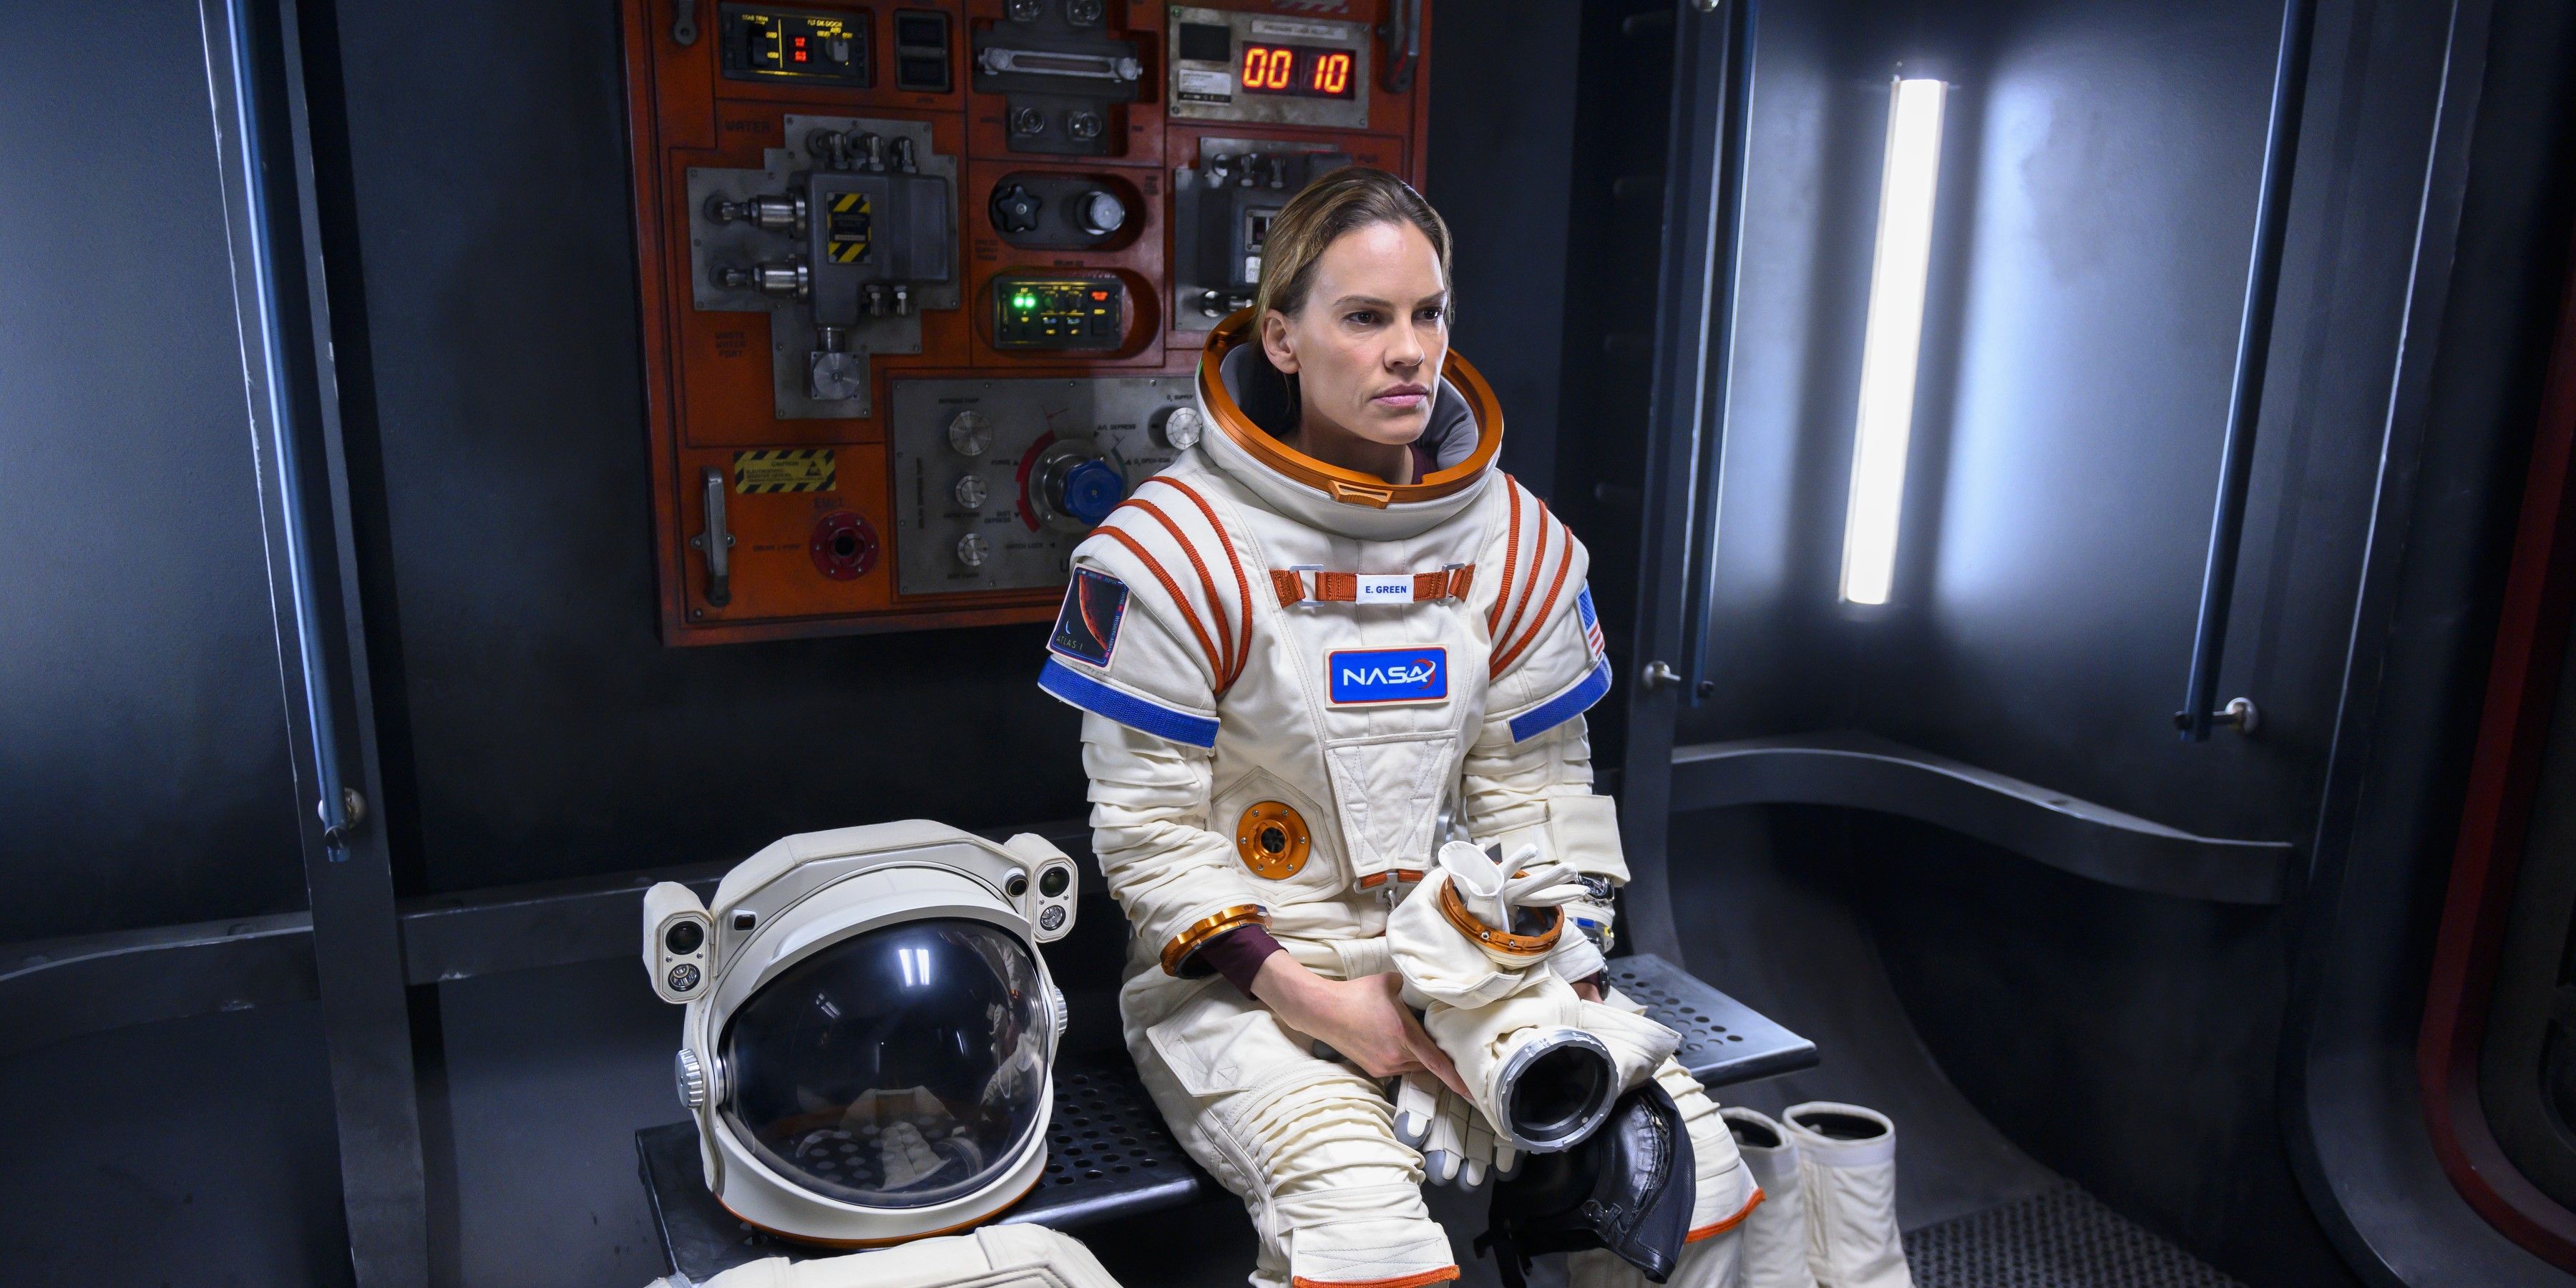 Emma sits alone in an astronaut suit in Away